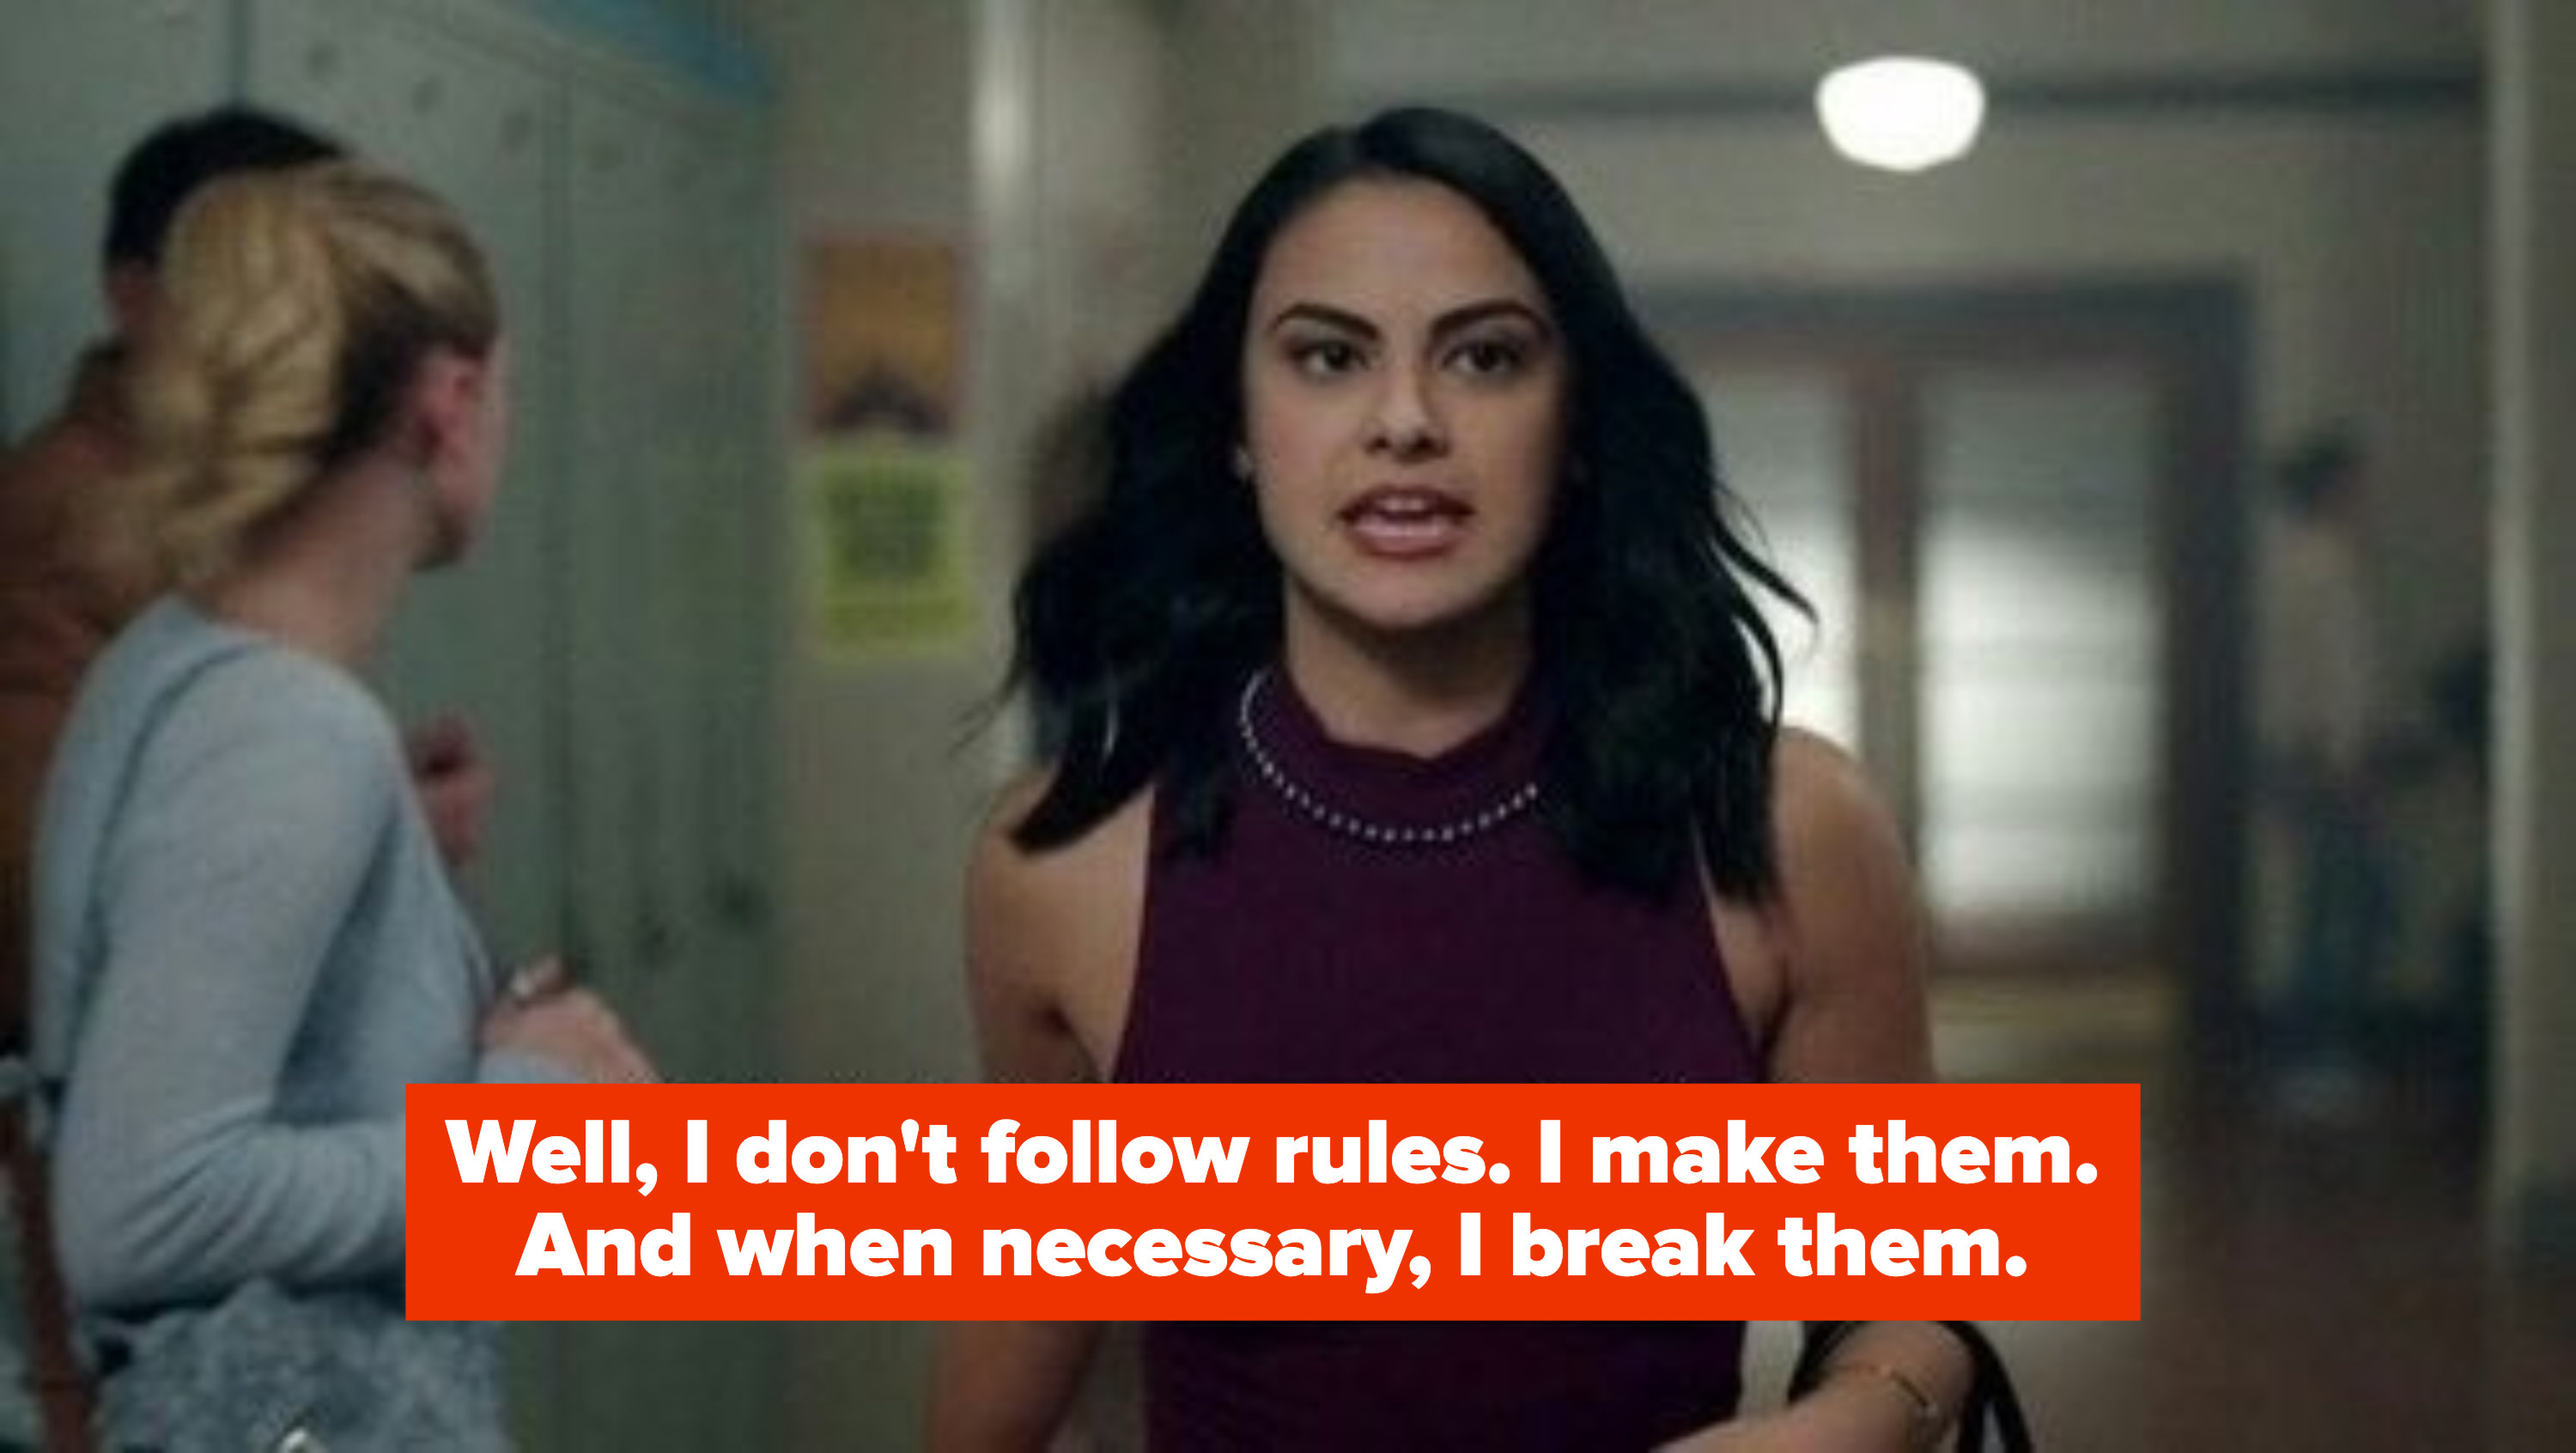 Veronica: &quot;Well, I don&#x27;t follow rules. I make them. And when necessary, I break them&quot;